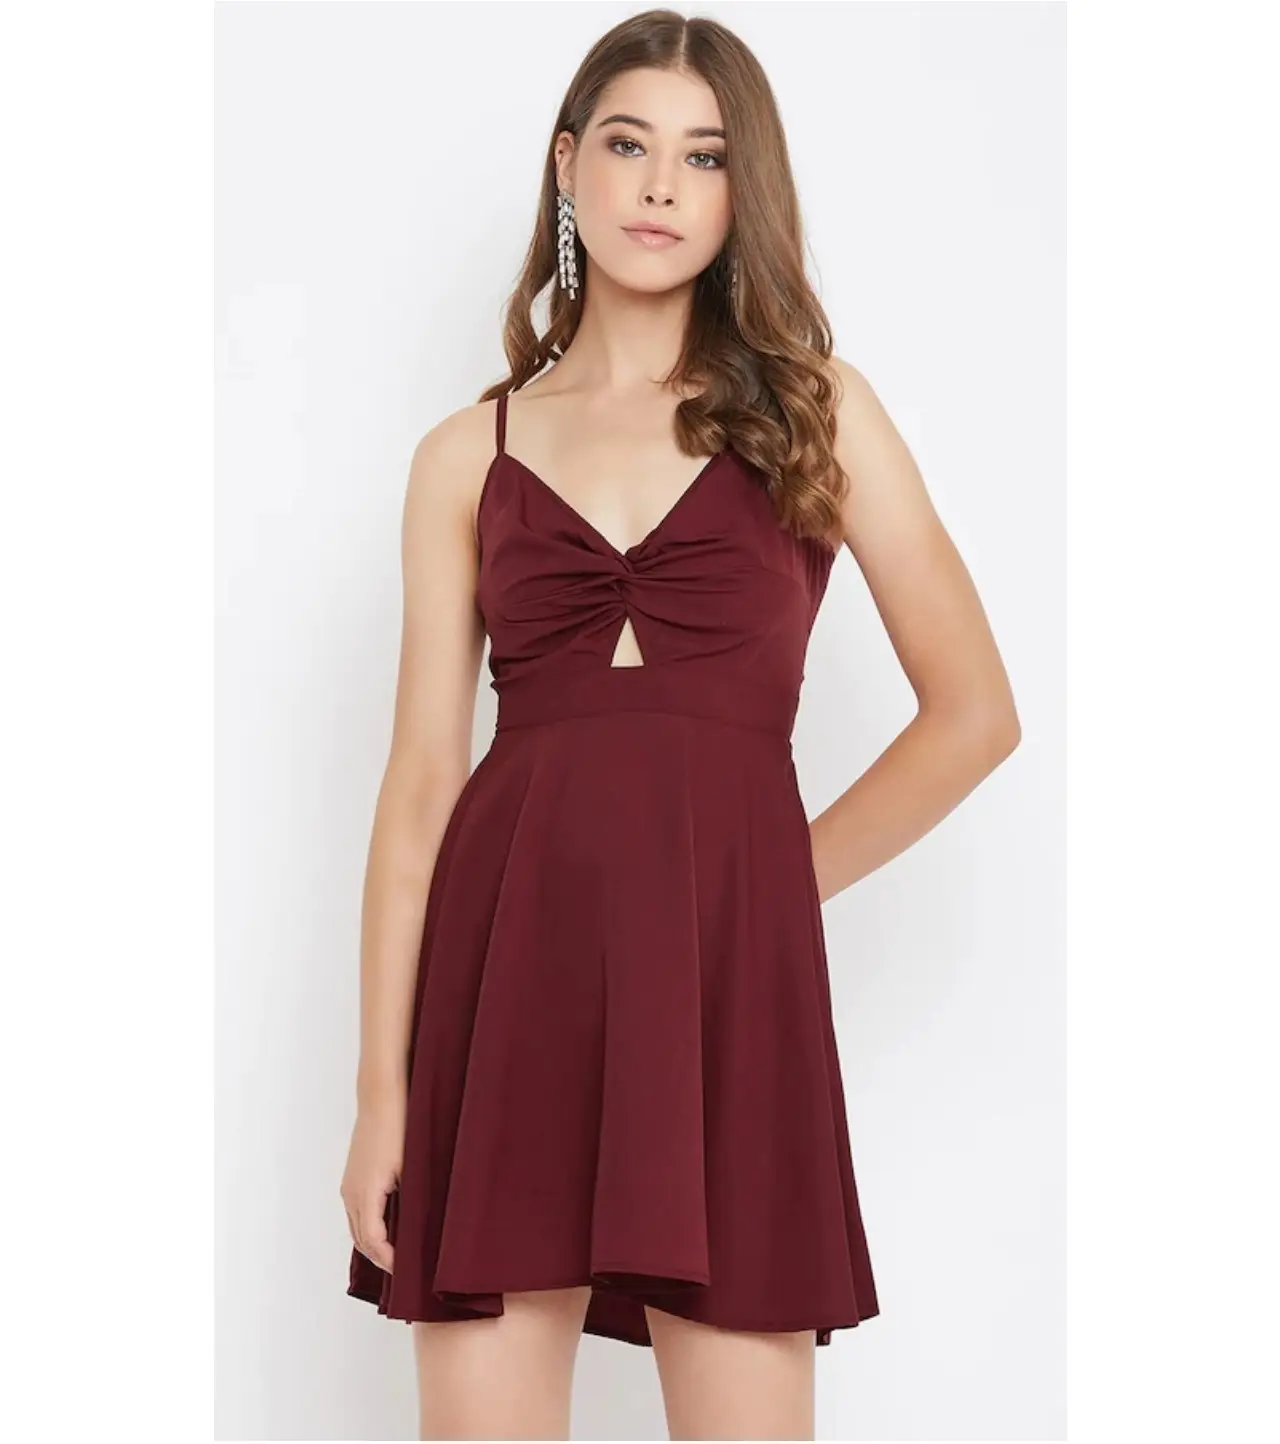 Maroon Twisted Fit and Flare Dress with Cut-Outs. Latest 2023 fashion. BEST DRESS WOMEN GIRL PARTY CASUAL WEDDING BEACH.